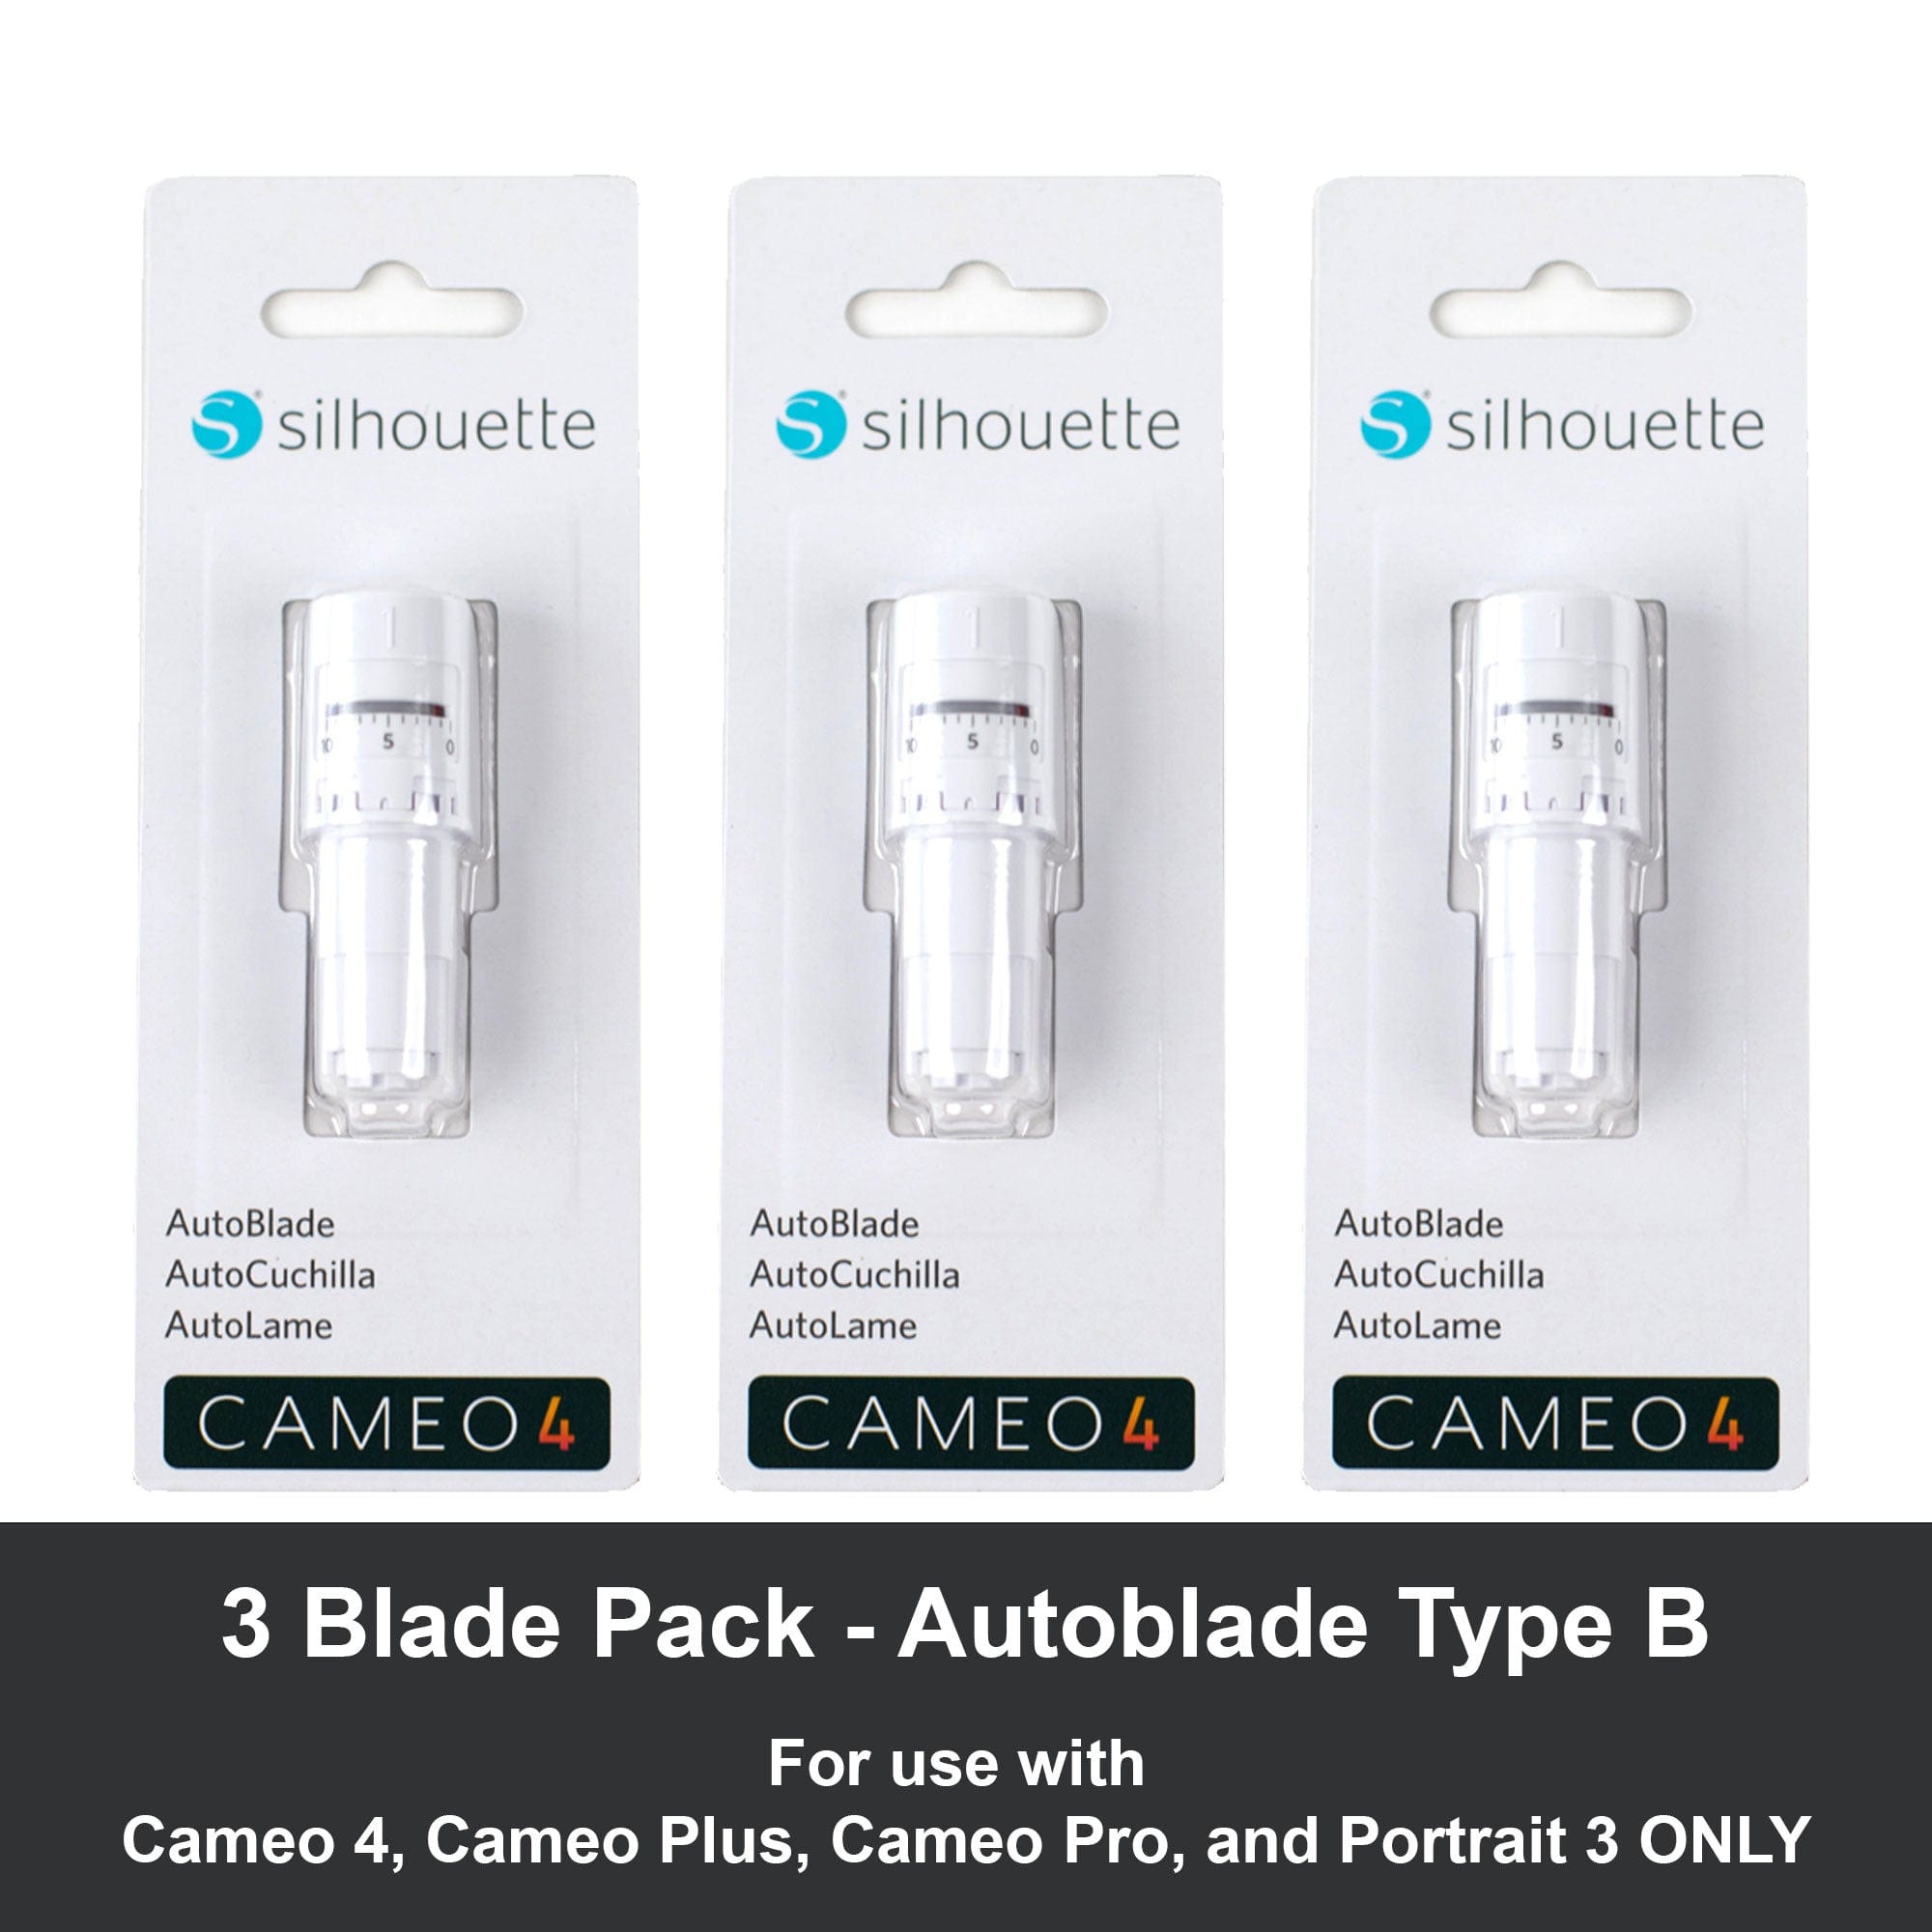 Silhouette America Blades & Cutting Mats Silhouette AutoBlade 2- 3 Pack For Use with CAMEO 4 and 50 Free Bonus Designs